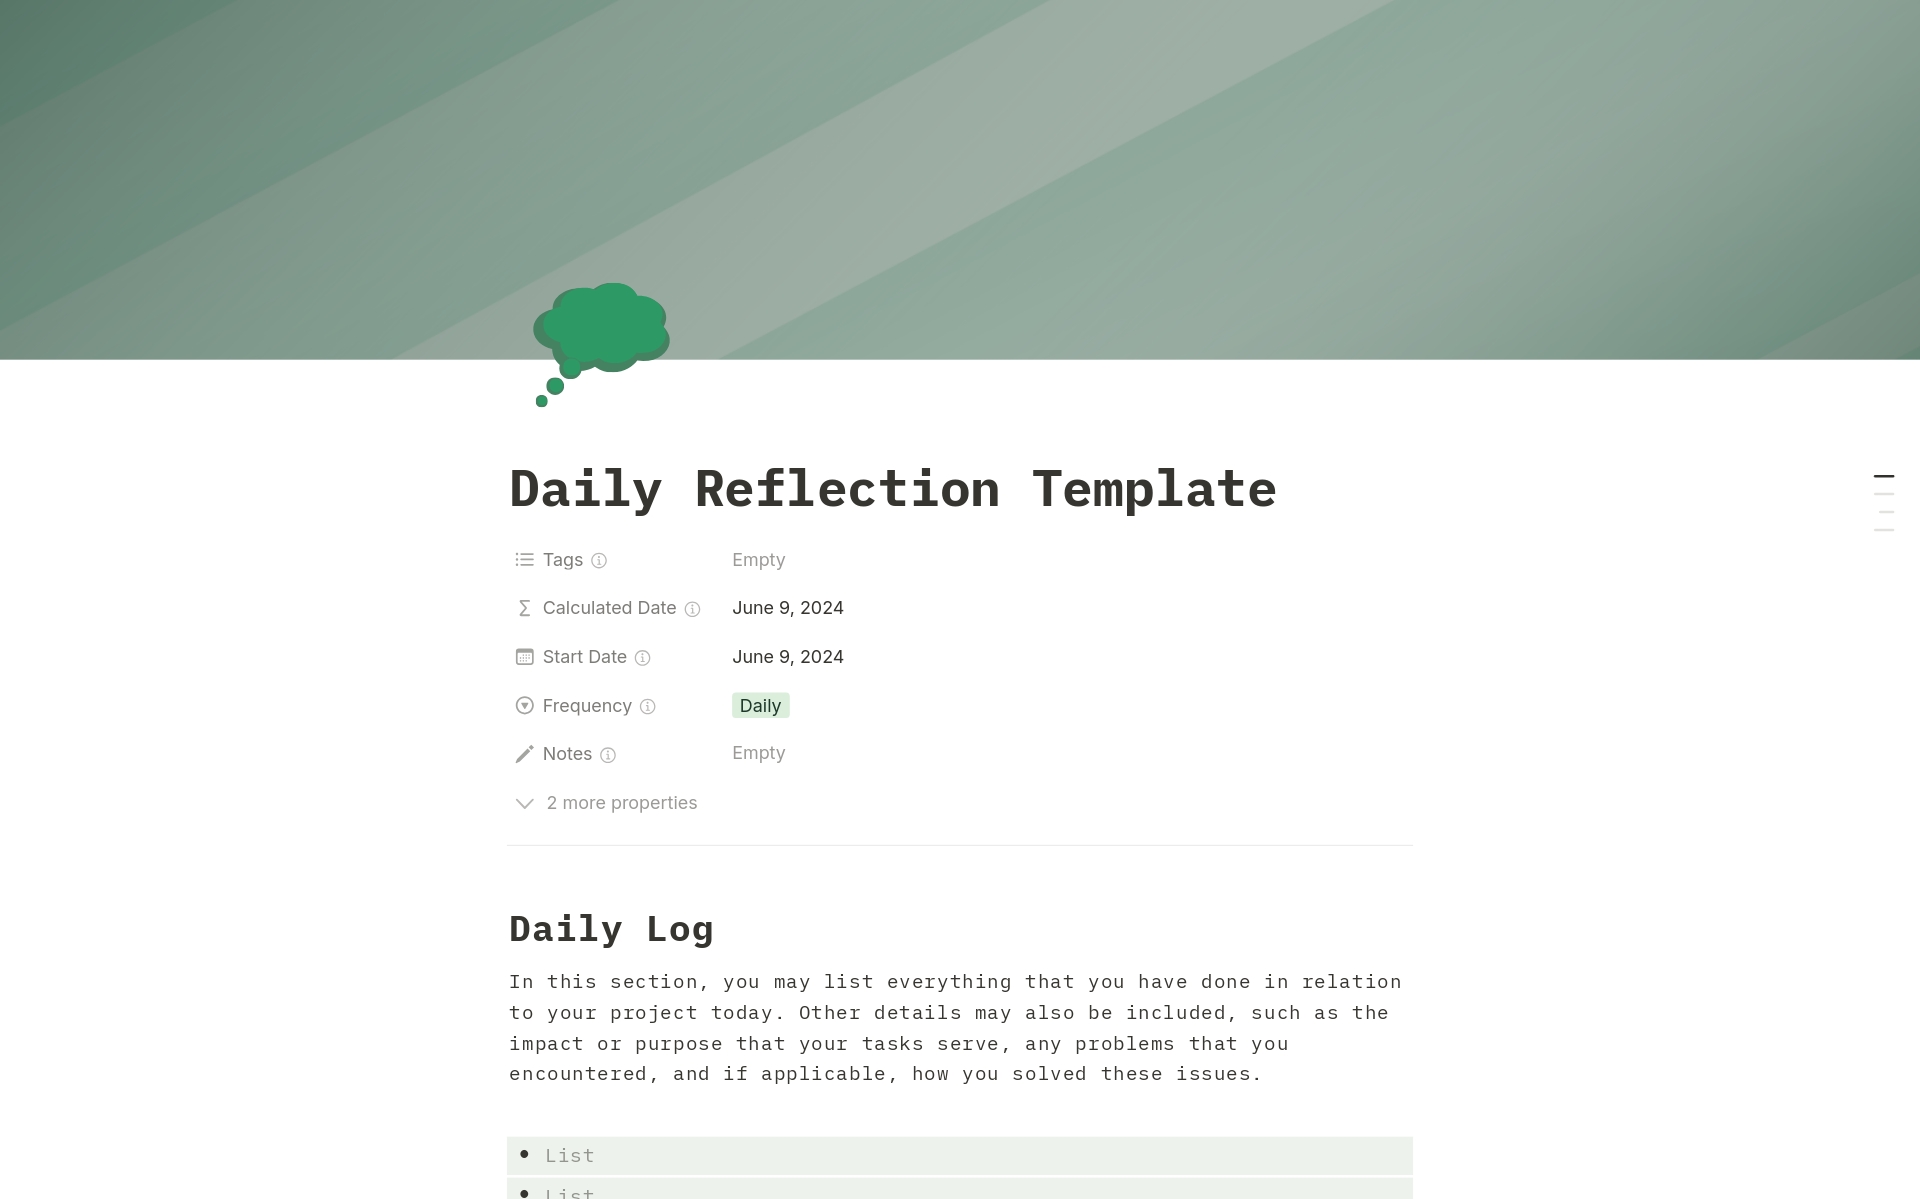 The Developer Organizer Template contains everything that I use in my web development projects. I created this template with the intent of promoting a purposeful and content development process and overall lifestyle.